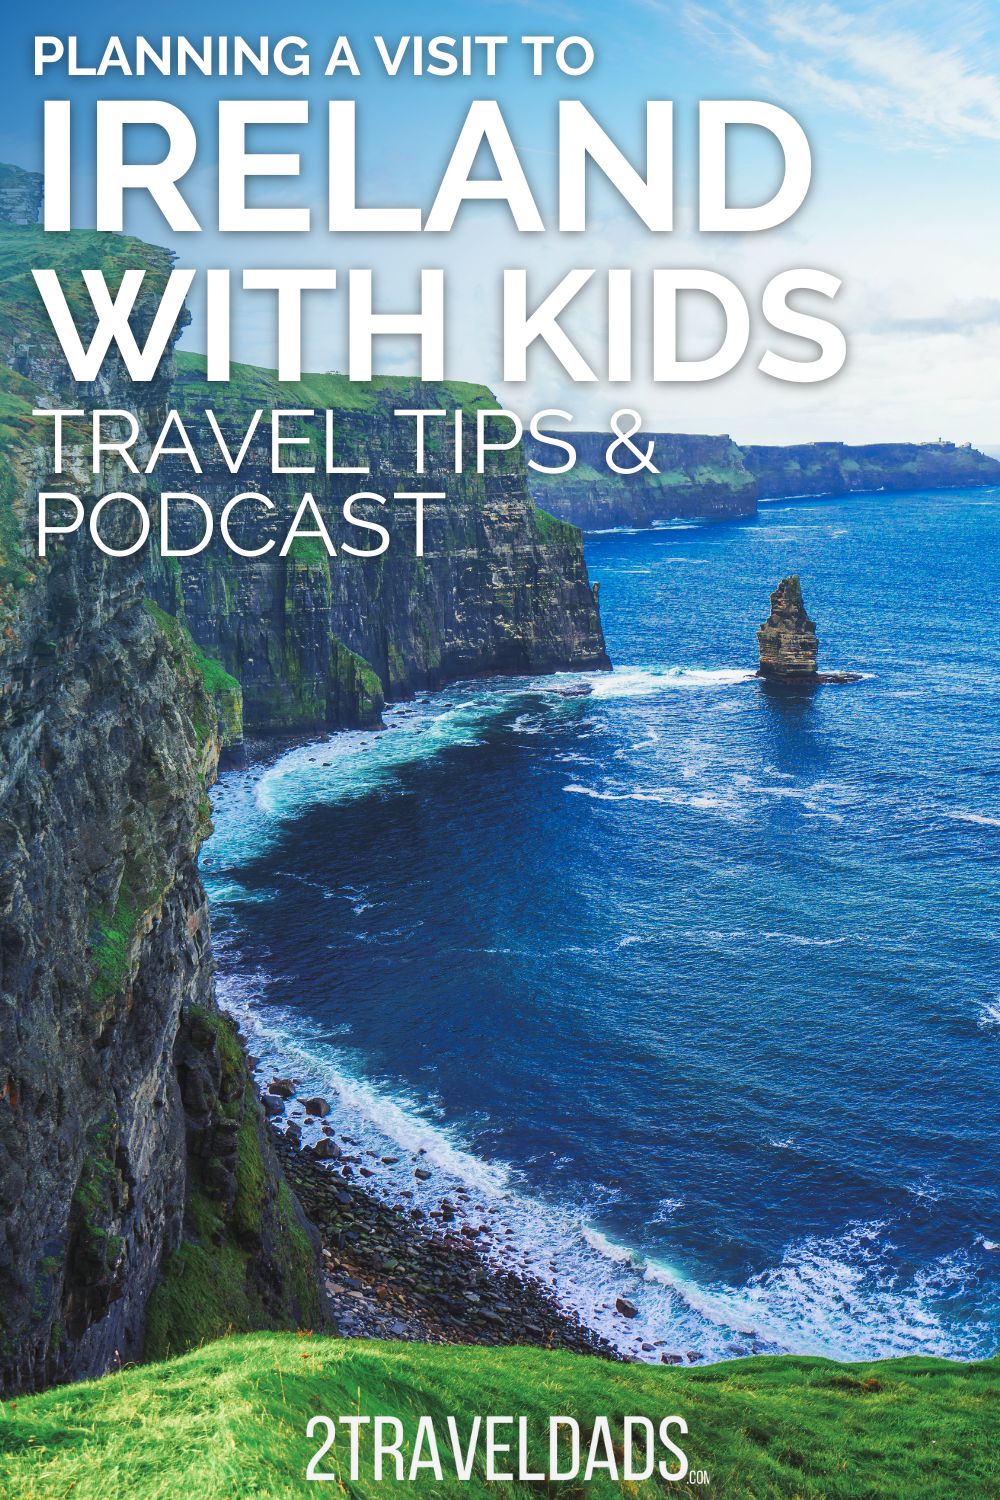 Visiting Ireland with kids is a great introduction to traveling in Europe. A very easy country to get around, Ireland is full of sights and activities that are family friendly, full or culture and there are tons of beautiful sights. Get tips, itinerary ideas and listen to our podcast about Ireland with kids.